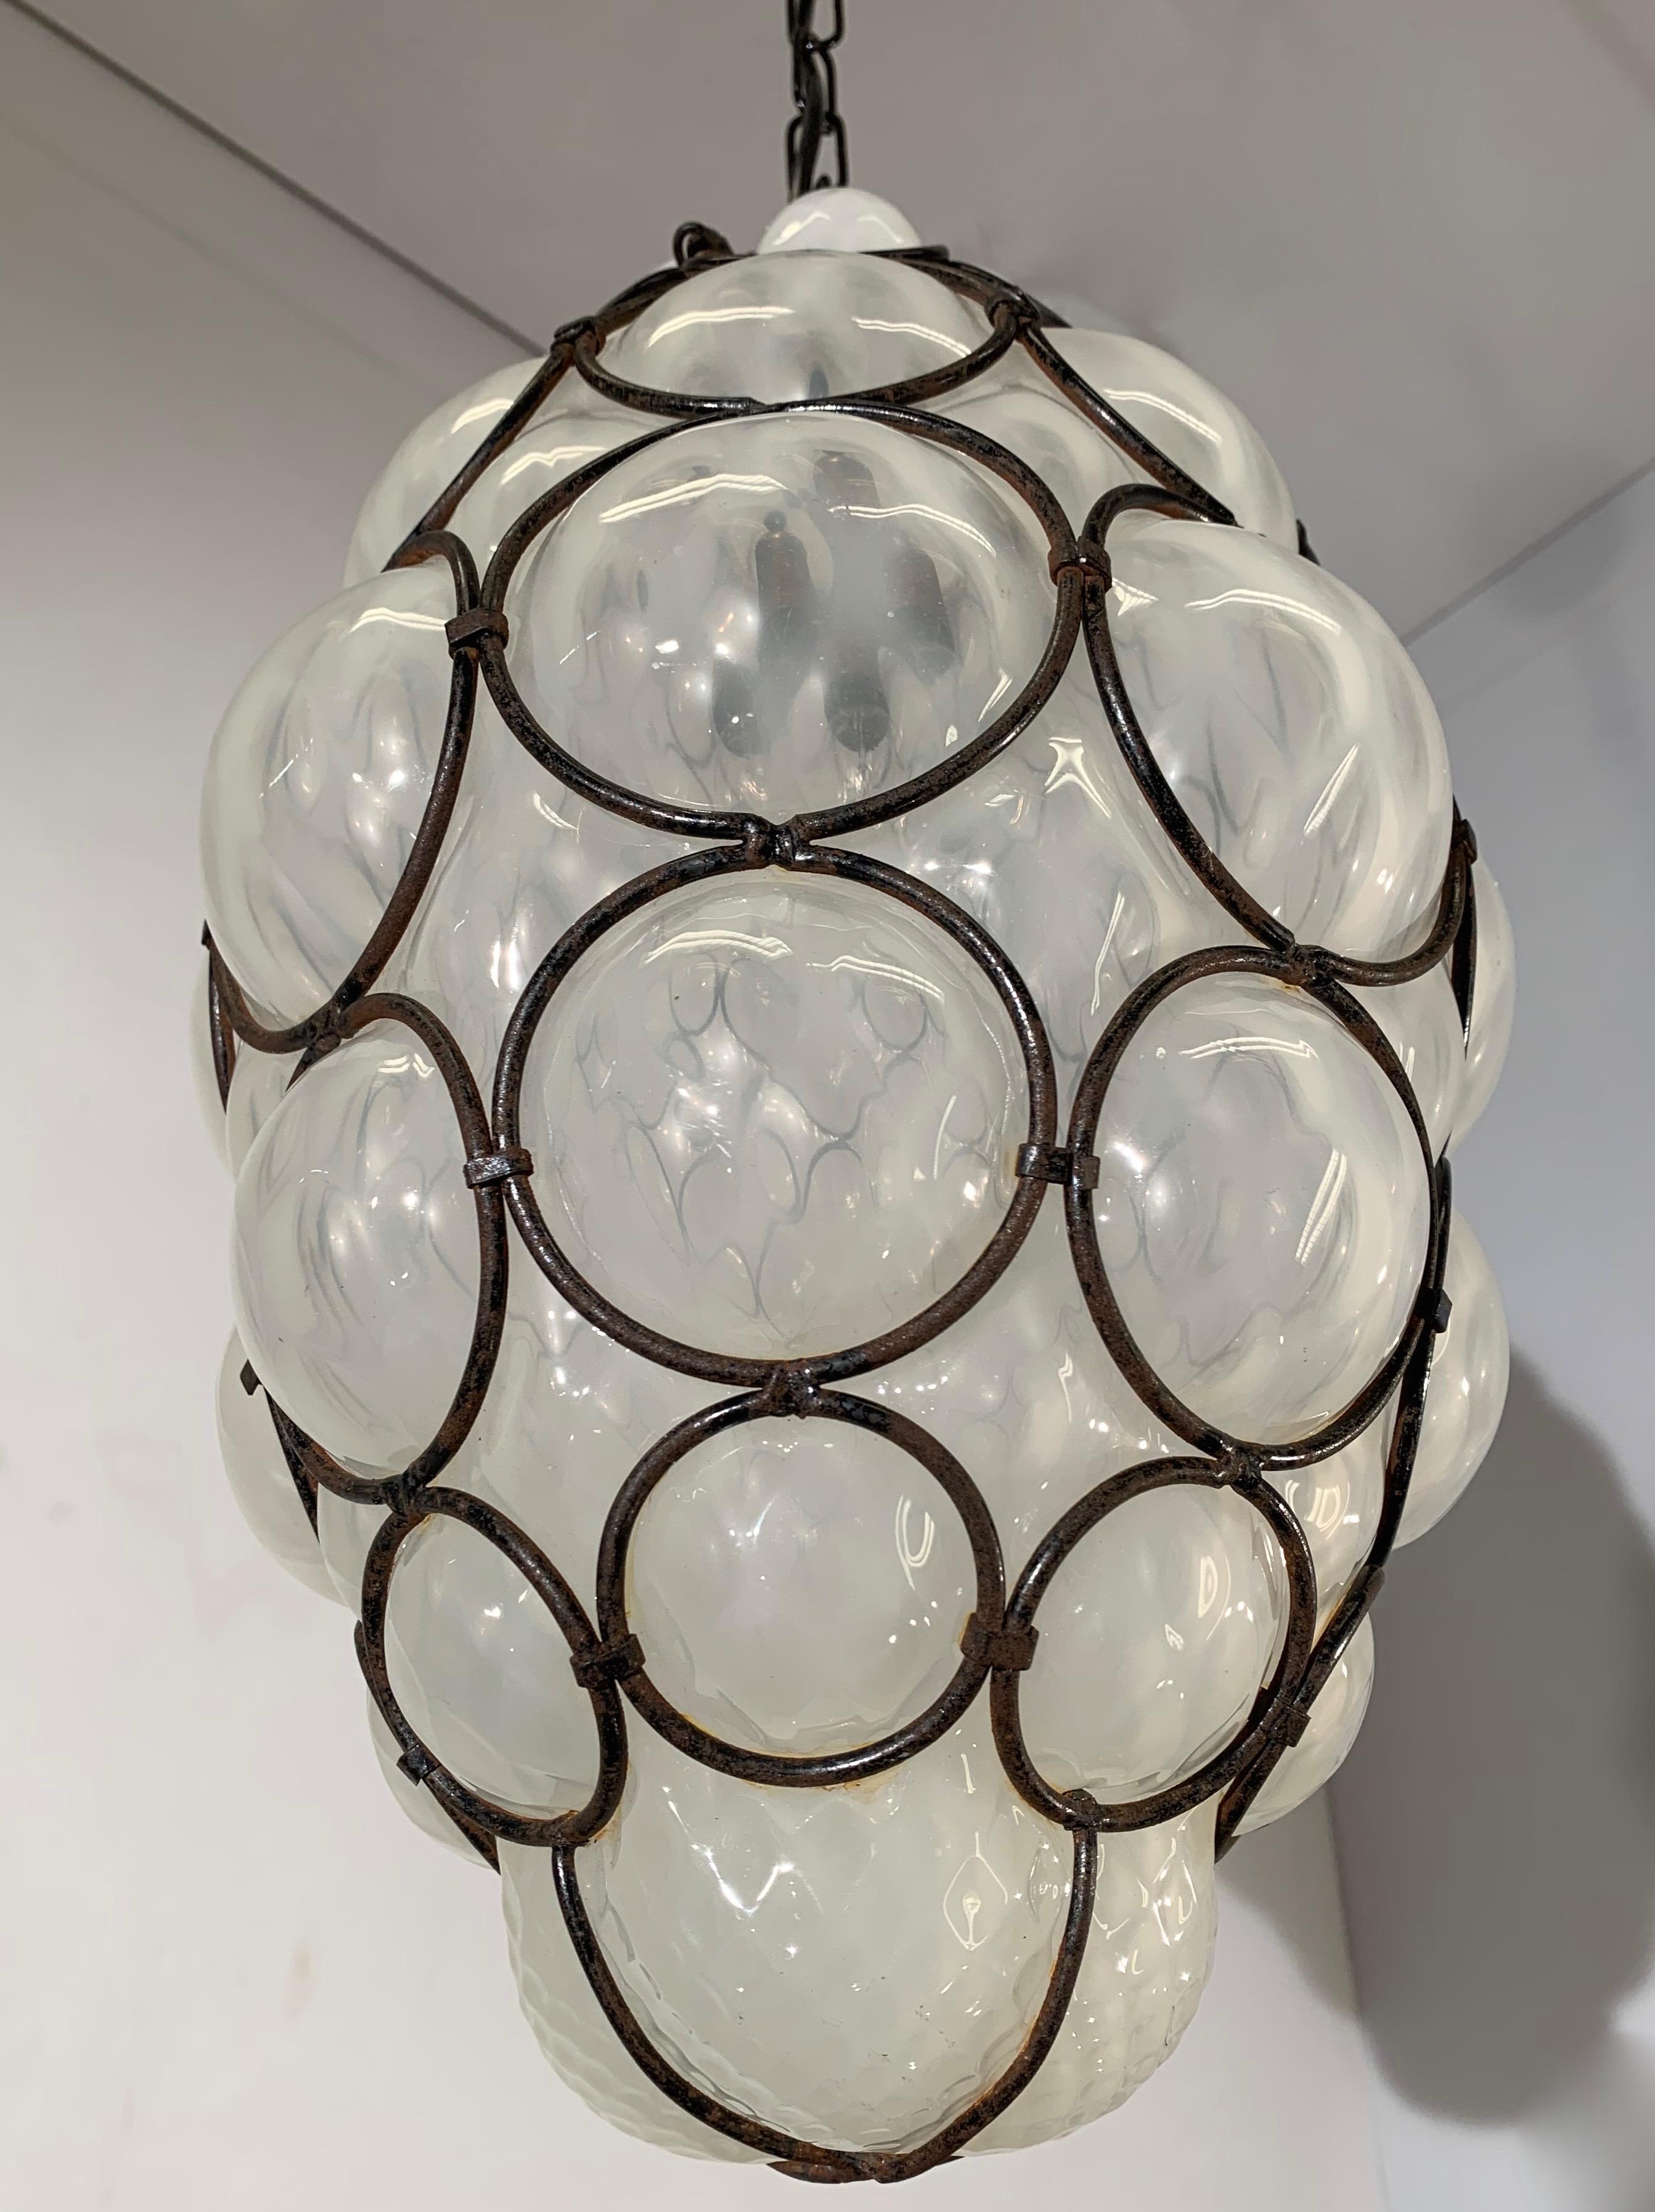 Hand-Crafted Antique and Rare Venetian Mouth Blown Frosted Glass in Metal Frame Pendant Light